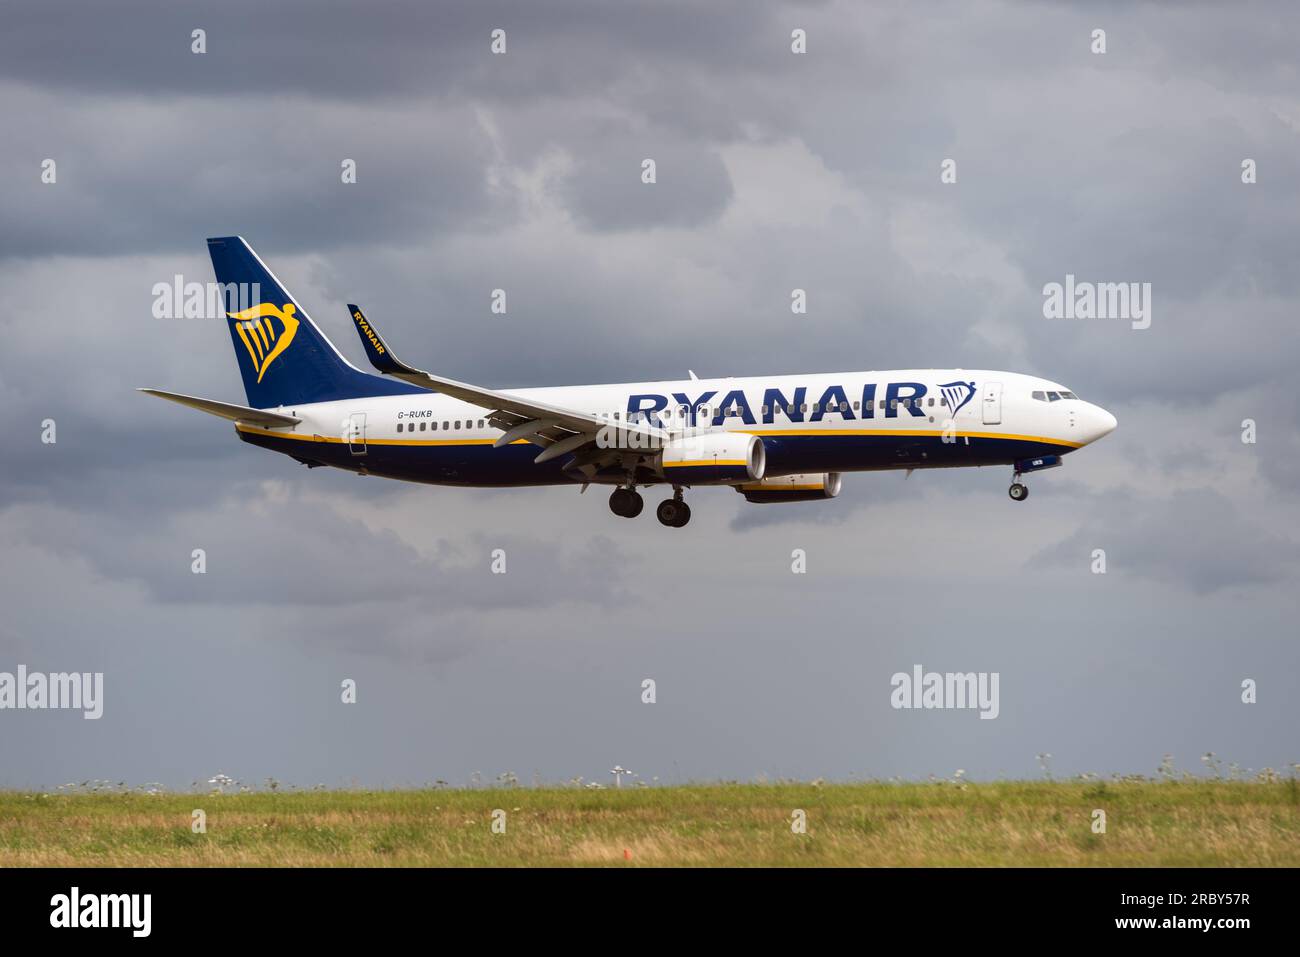 Ryanair Boeing 737 airliner jet plane on finals to land at London Stansted Airport, Essex, UK. Stock Photo